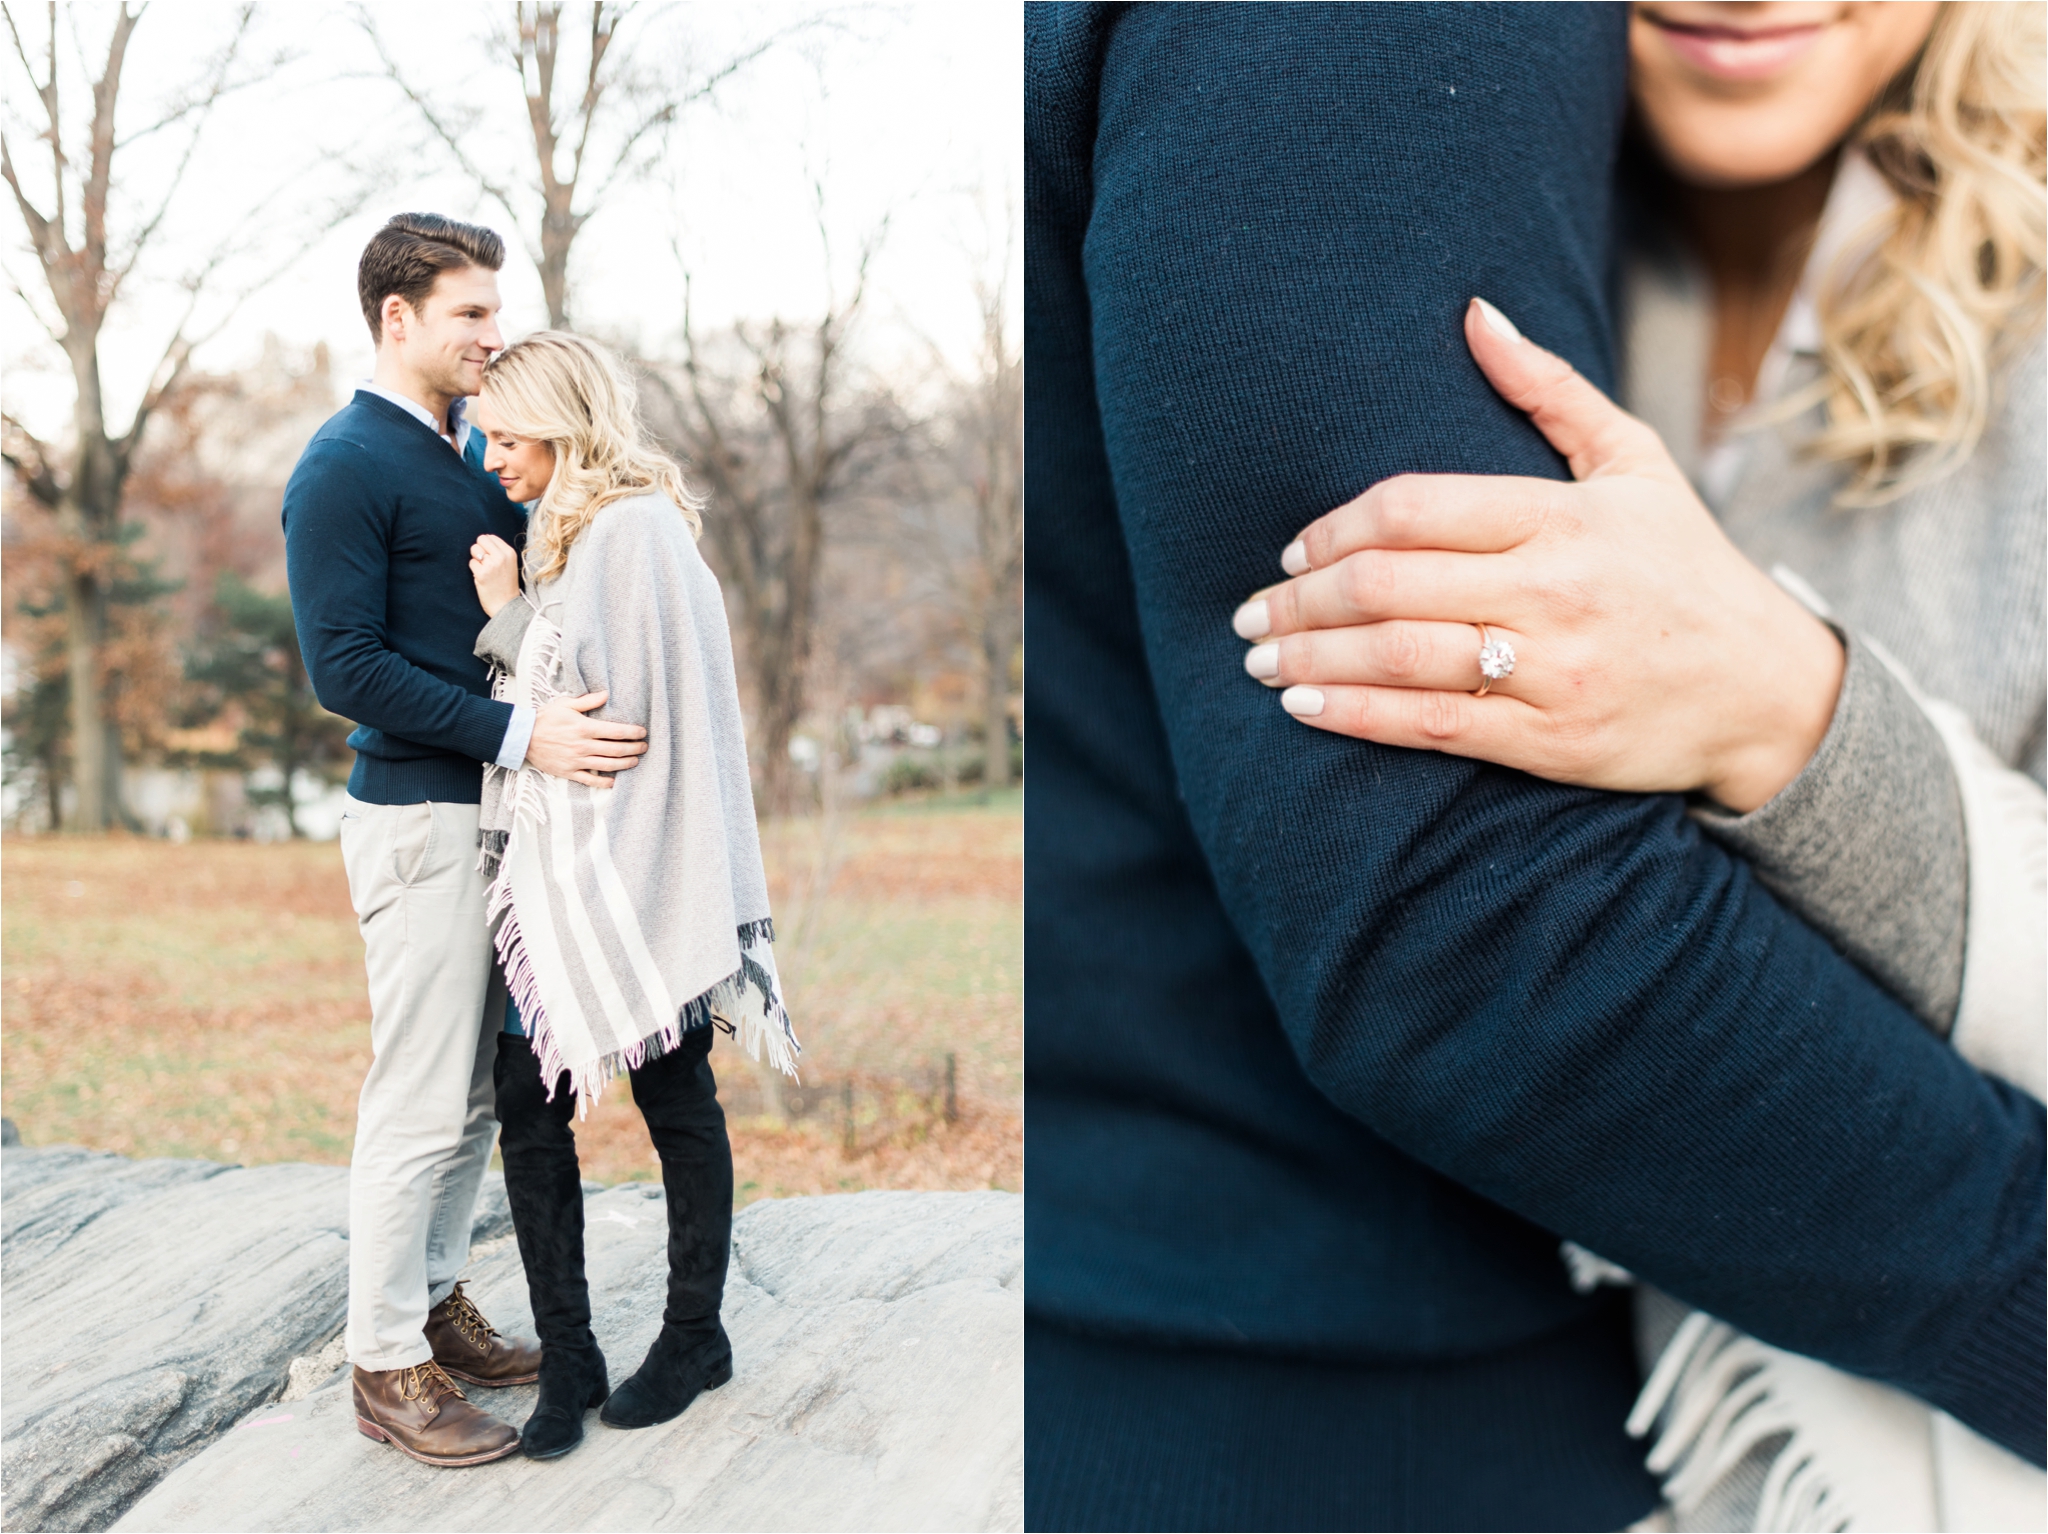 Central Park Engagements by Hillary Muelleck Photography // hillarymuelleck.com